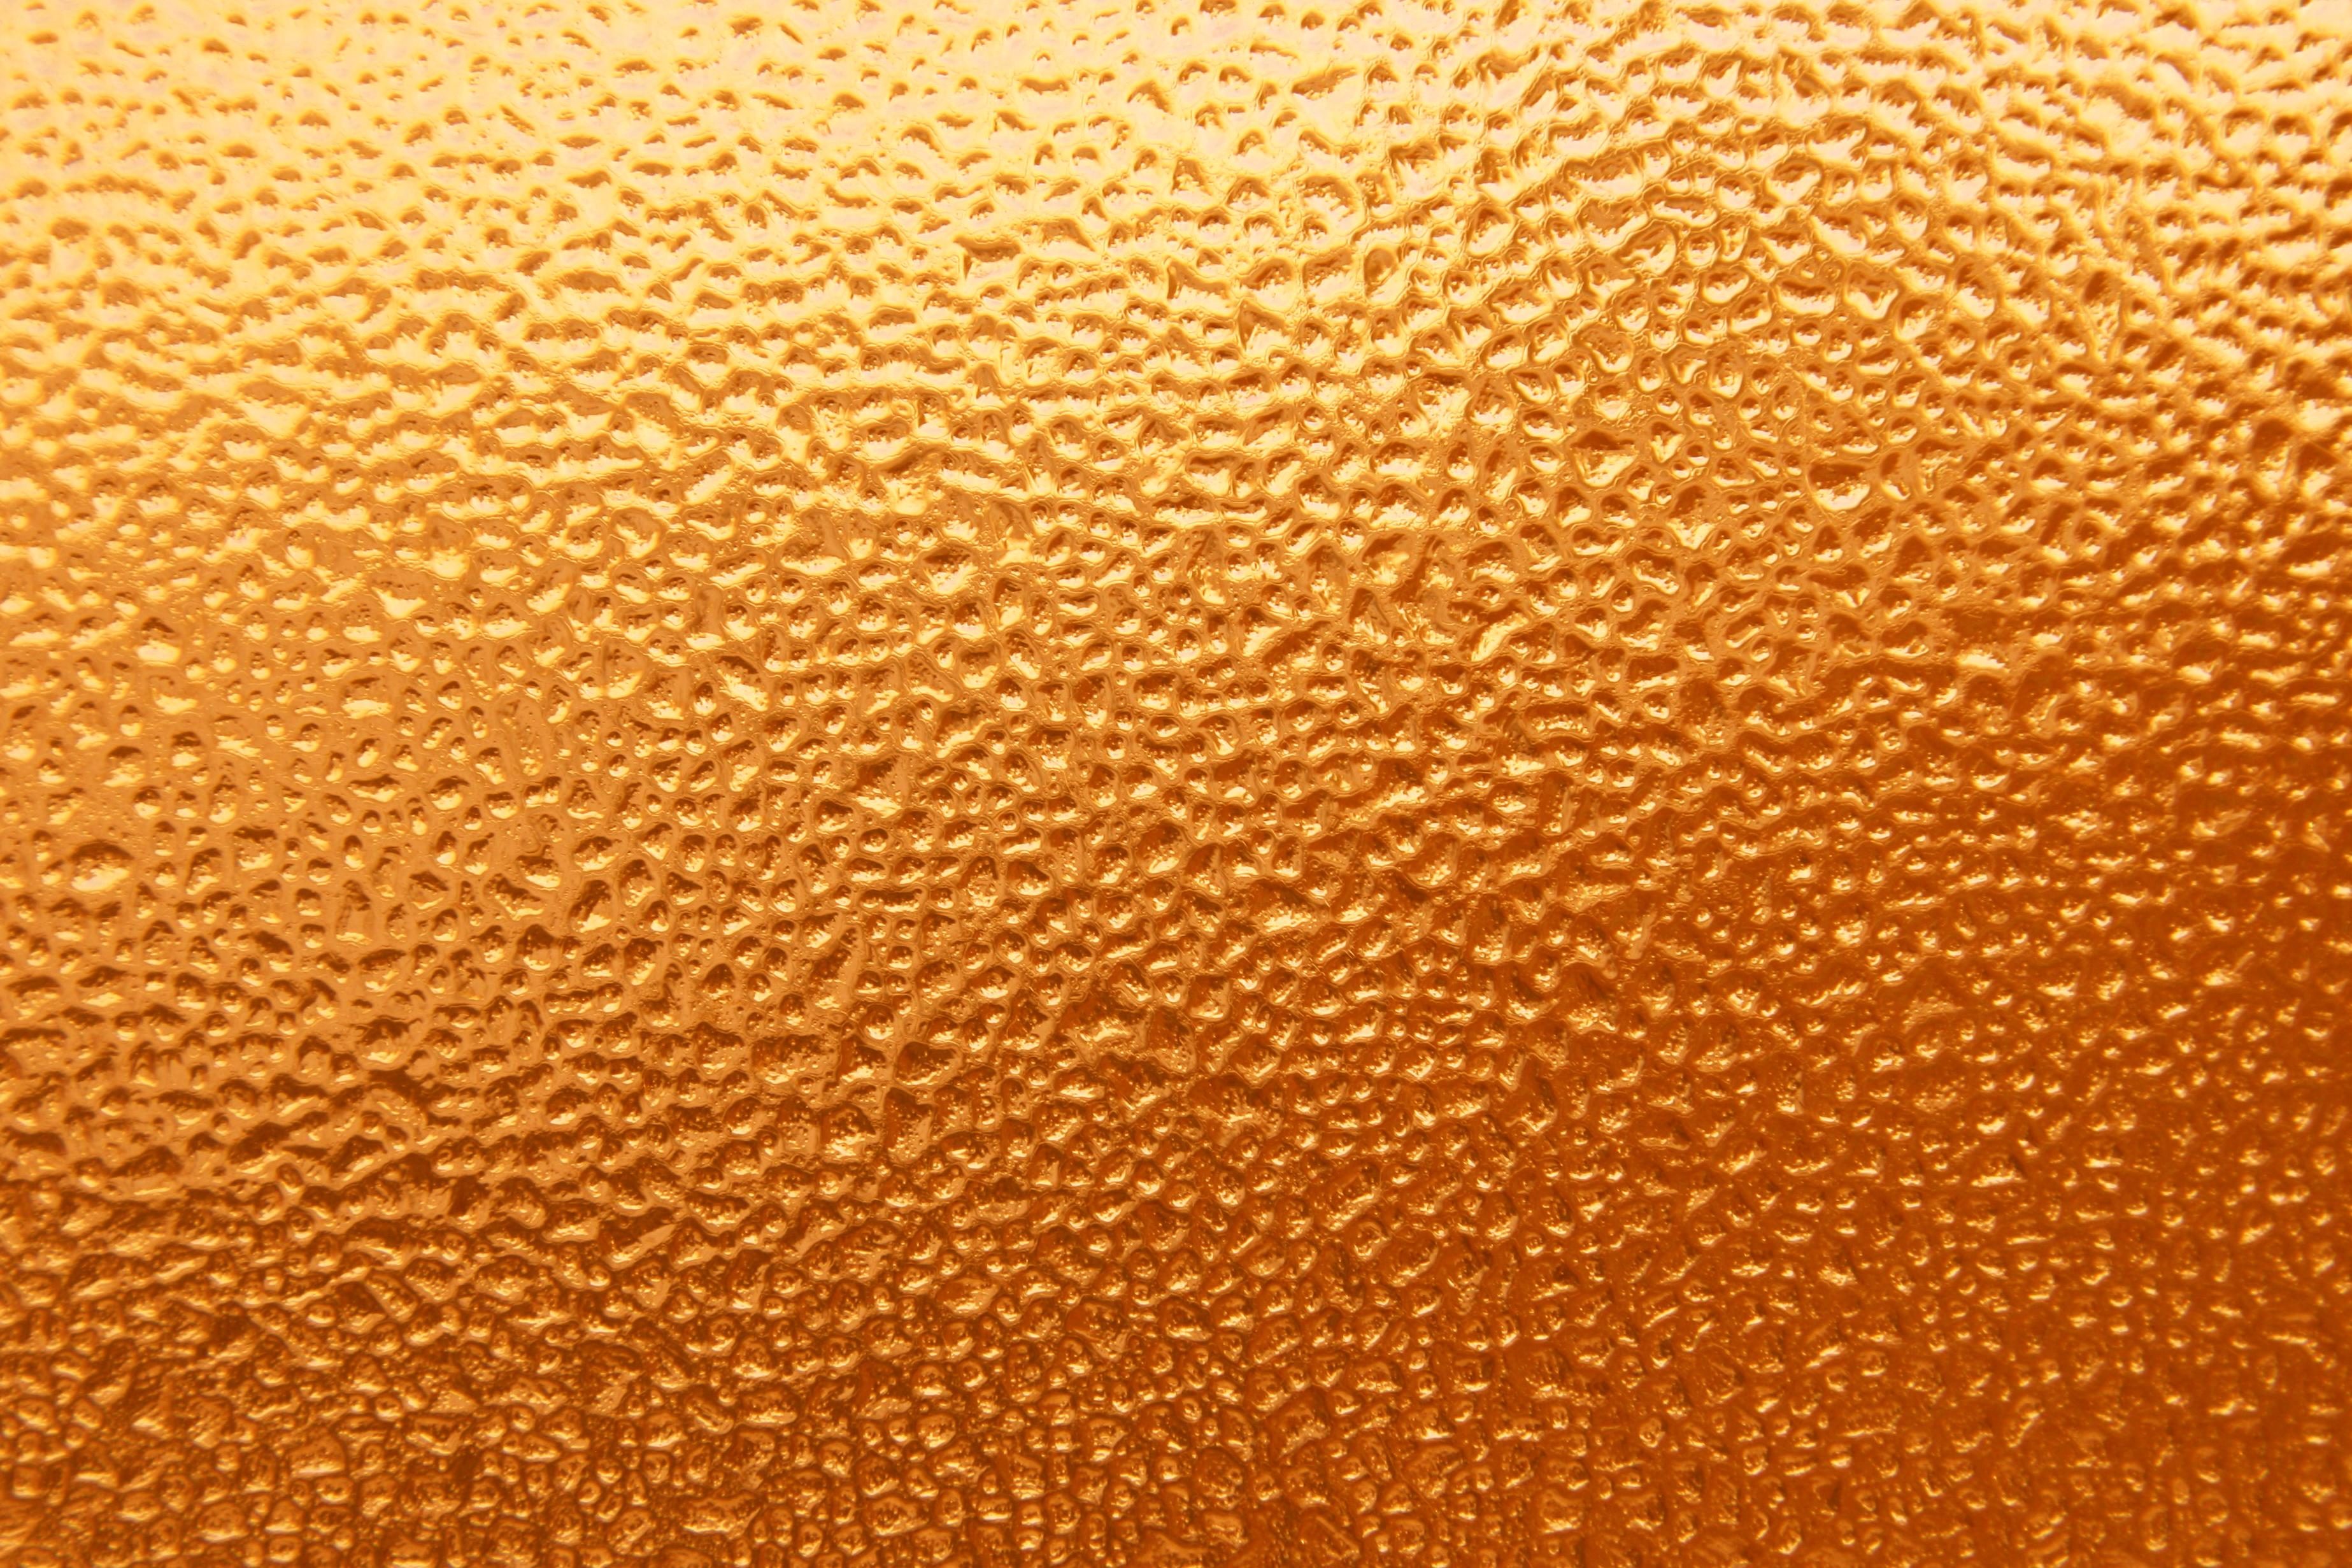 Free picture: dimpled design, ice, glass, texture, orange ...